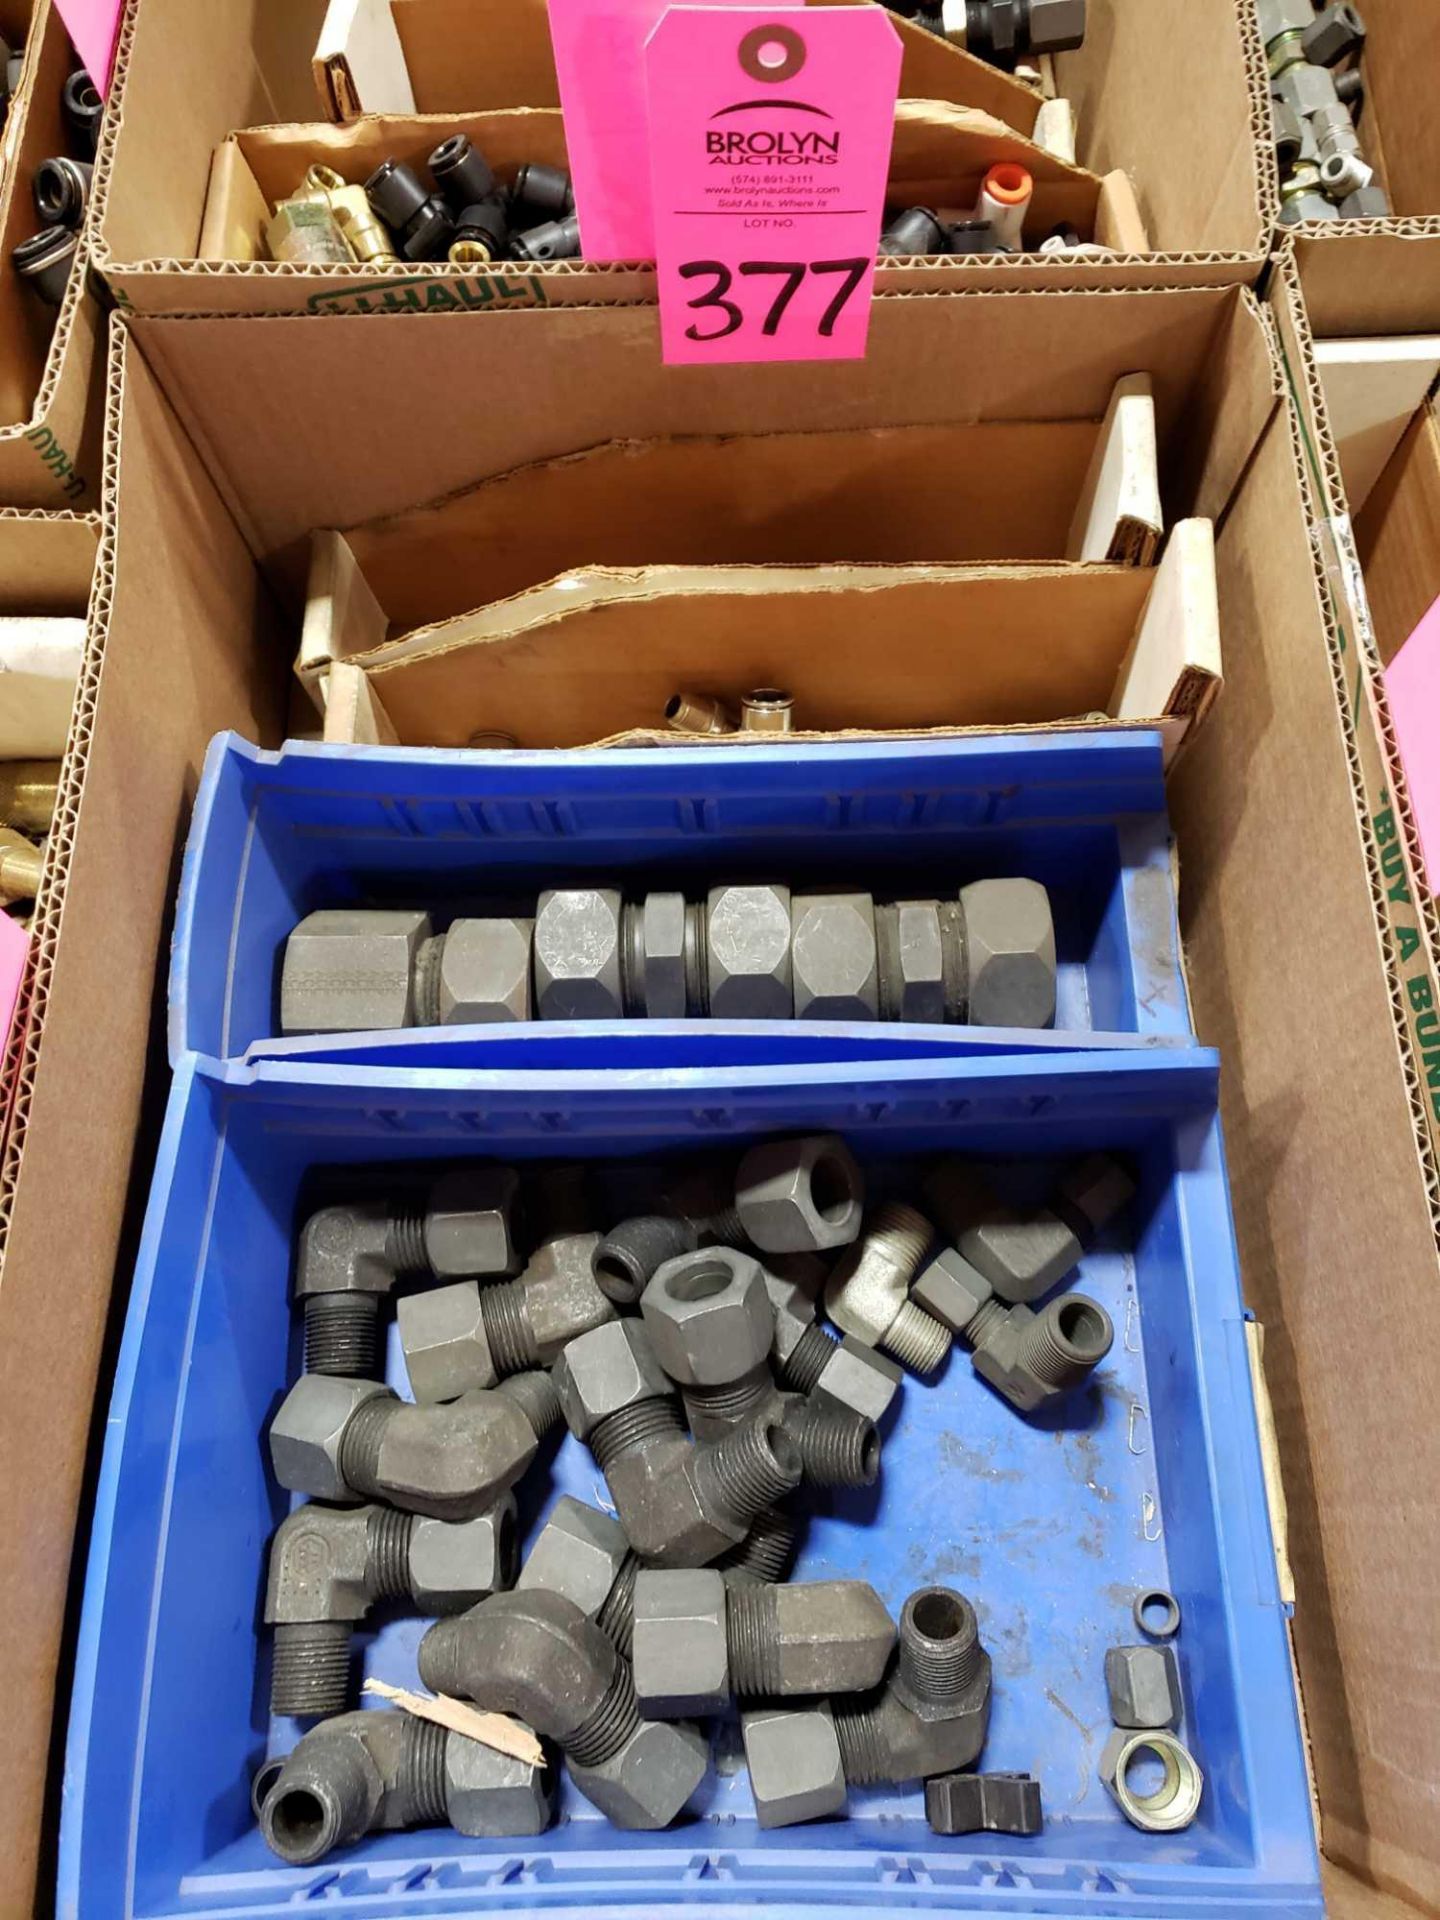 Lot of assorted hydraulic and pneumatic fittings. New as pictured.